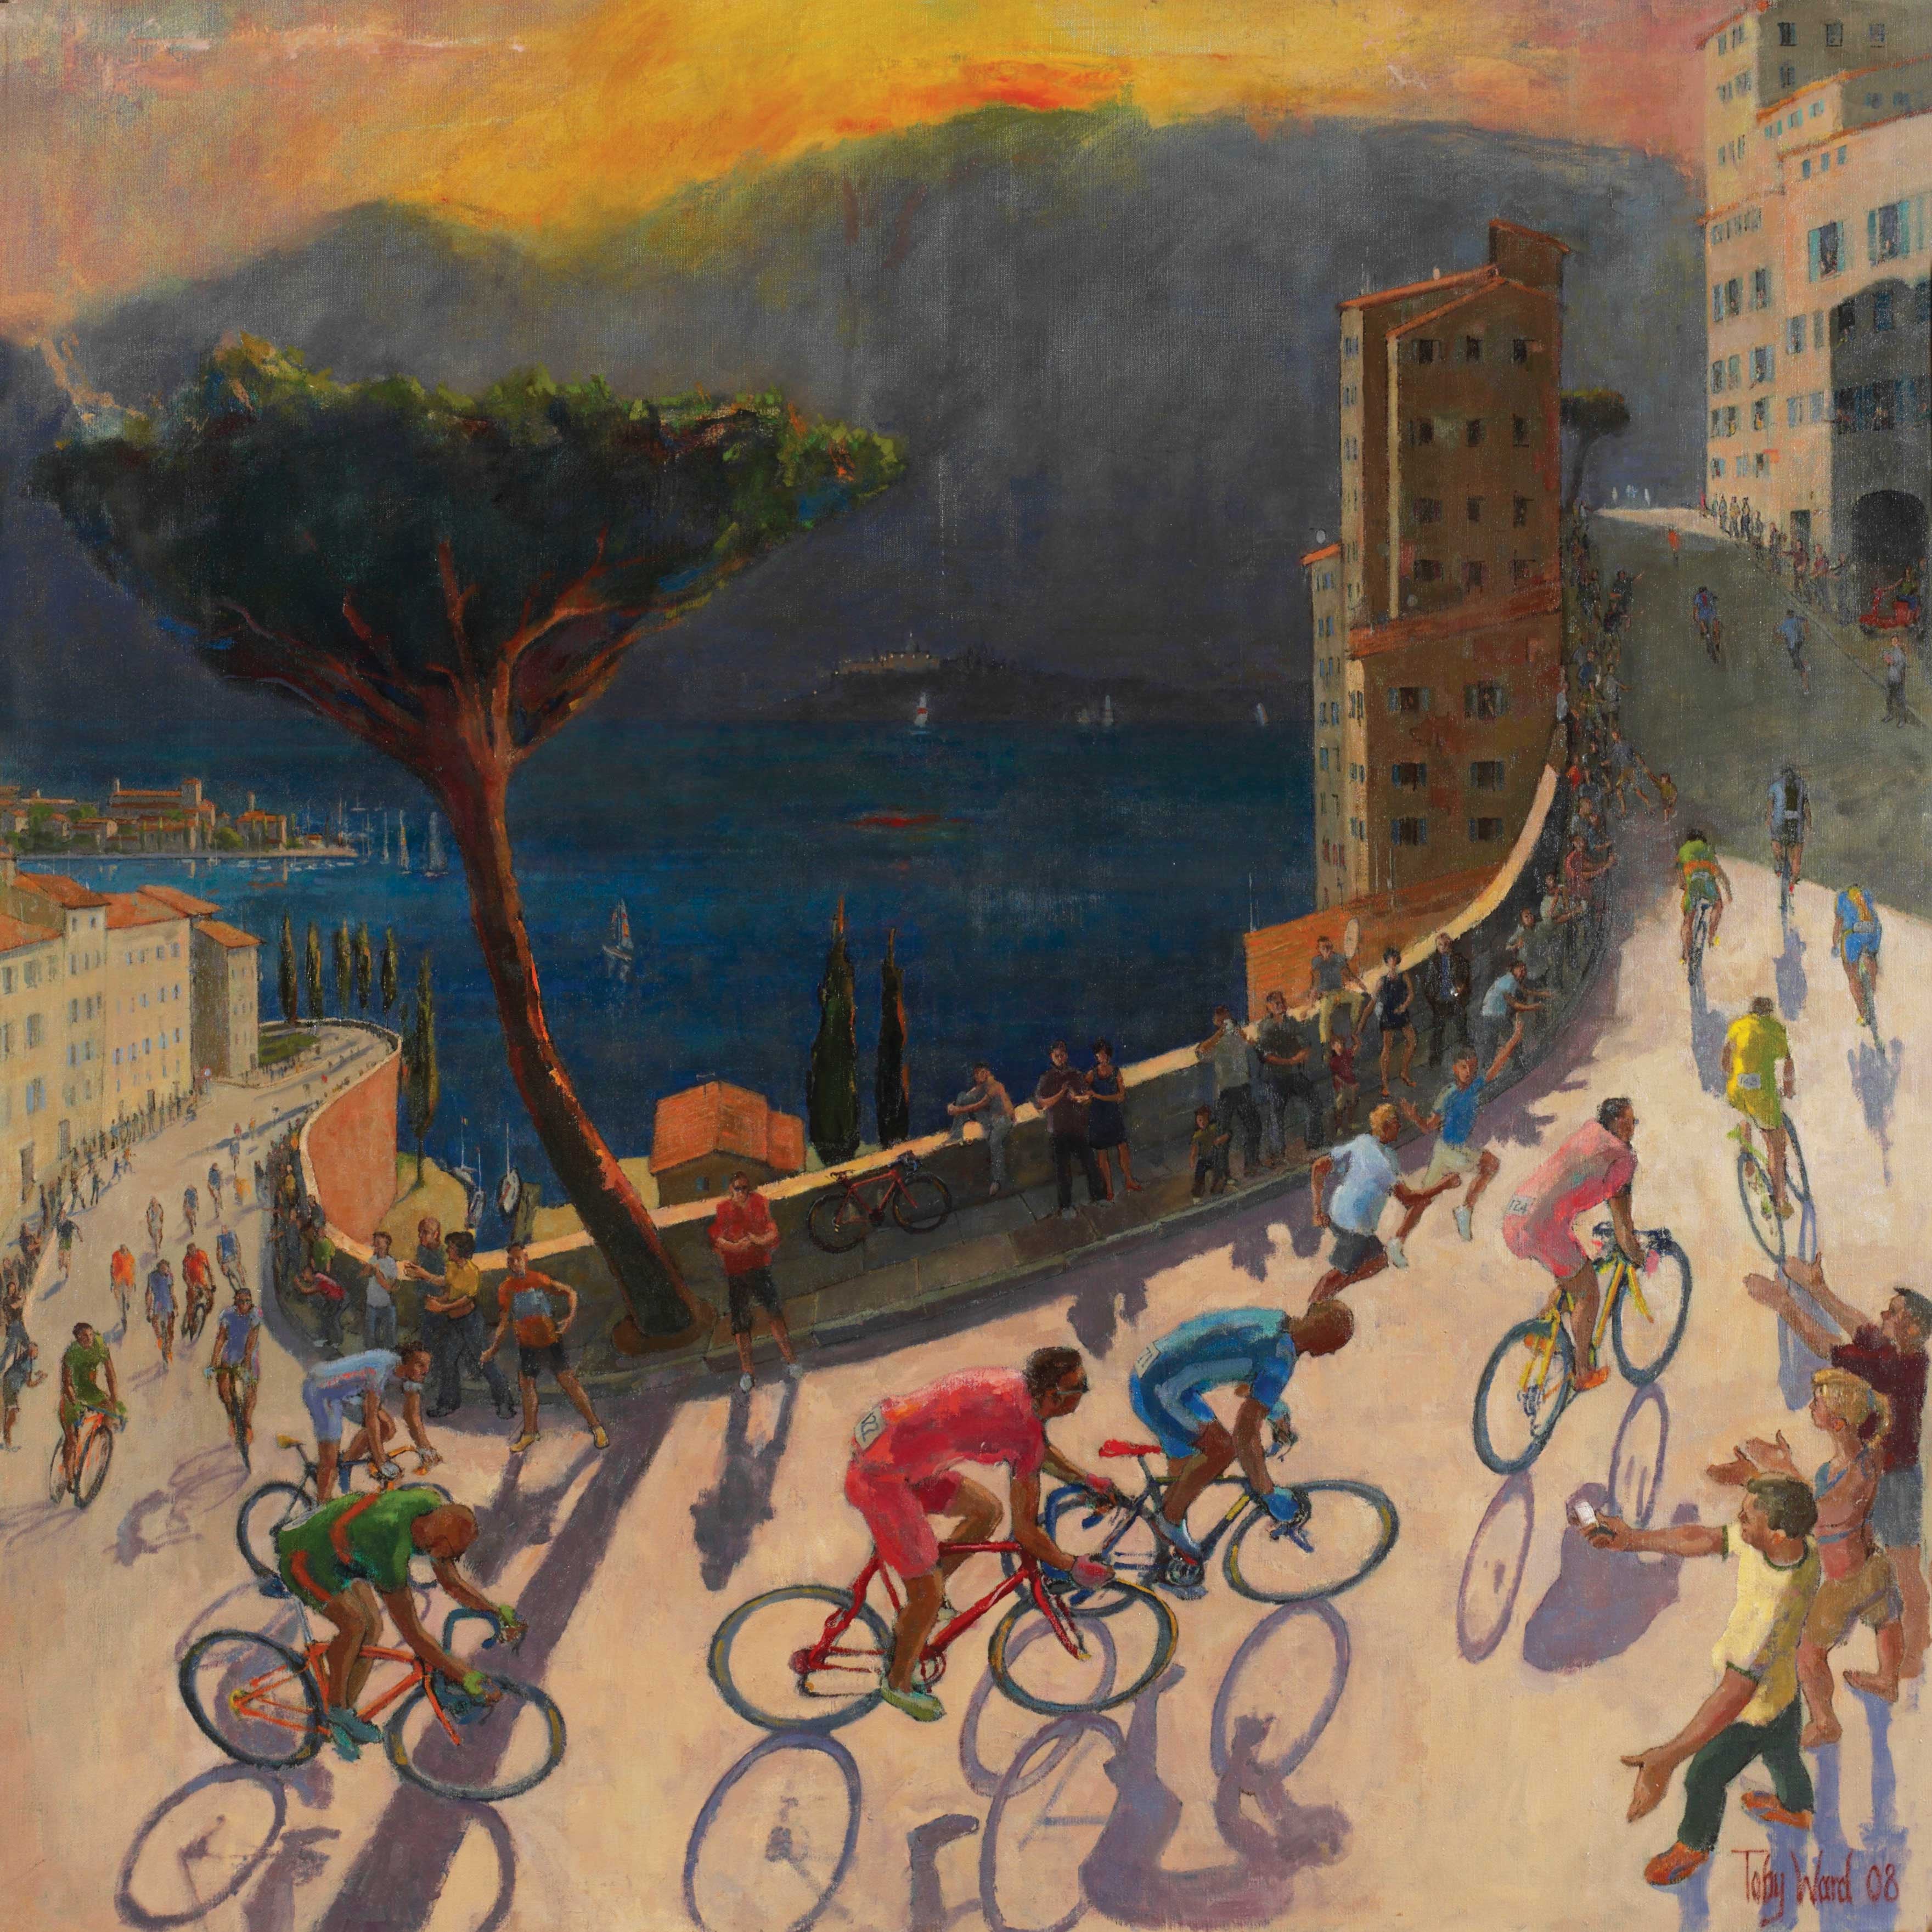 Giro II by Toby Ward, Art Greeting Card, NEAC range, Cyclists going up hill